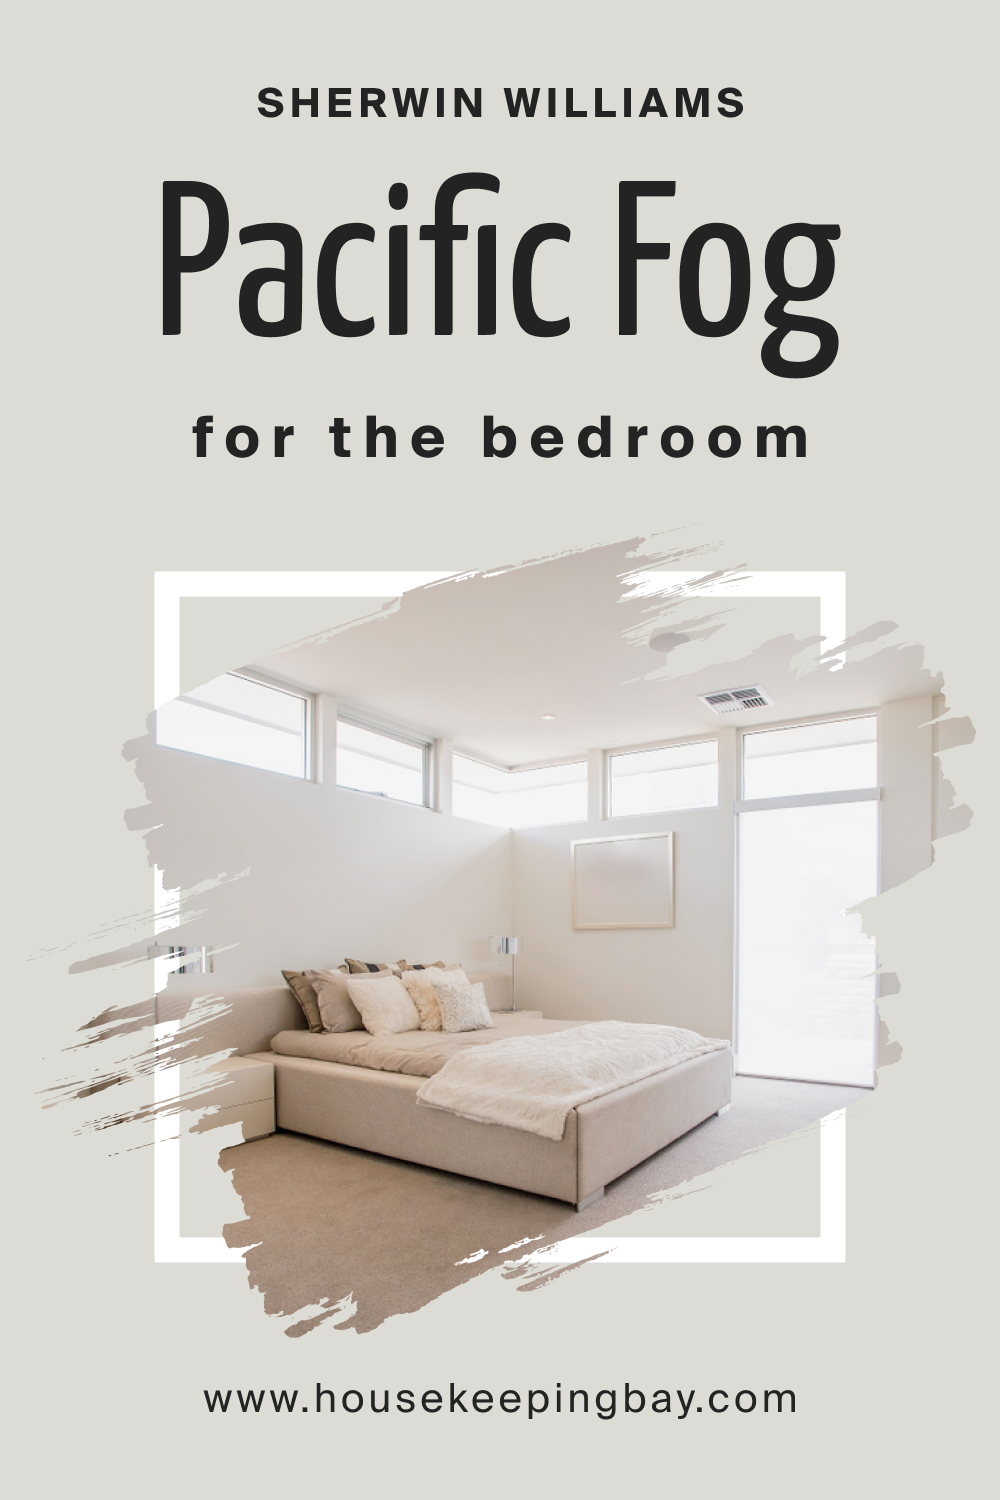 Sherwin Williams. SW 9627 Pacific Fog For the bedroom